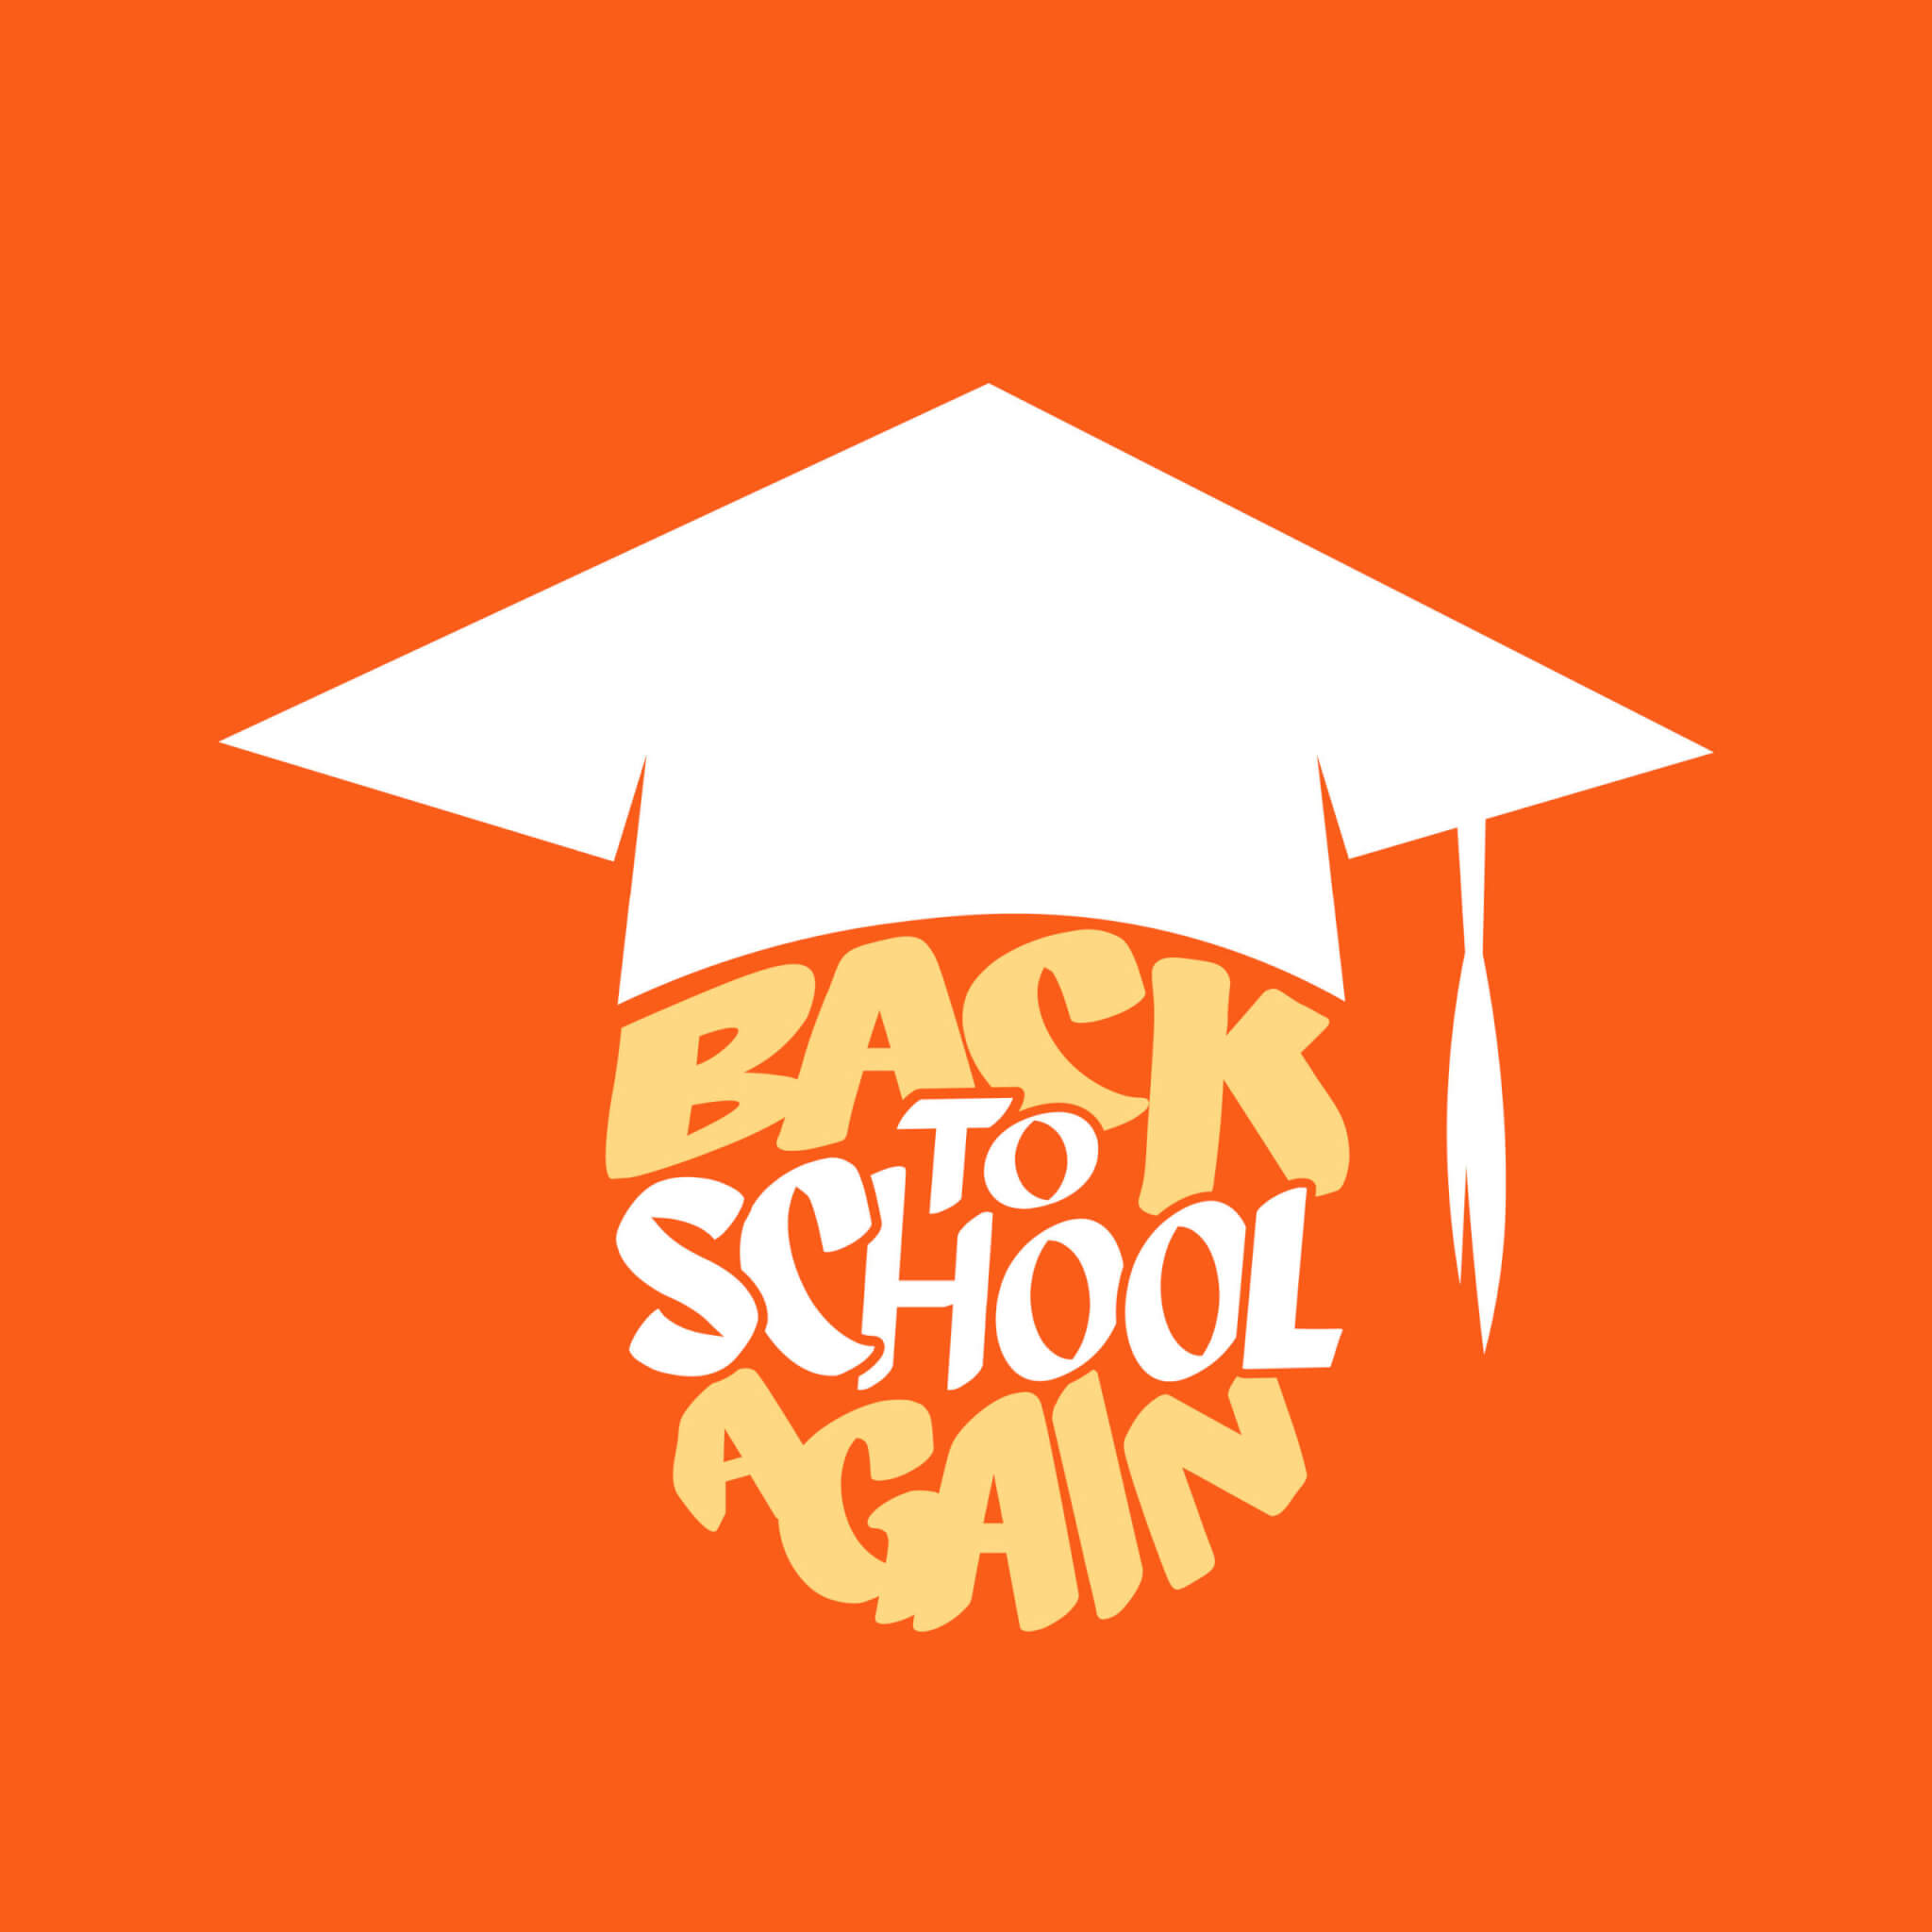 Back To School Again podcast logo